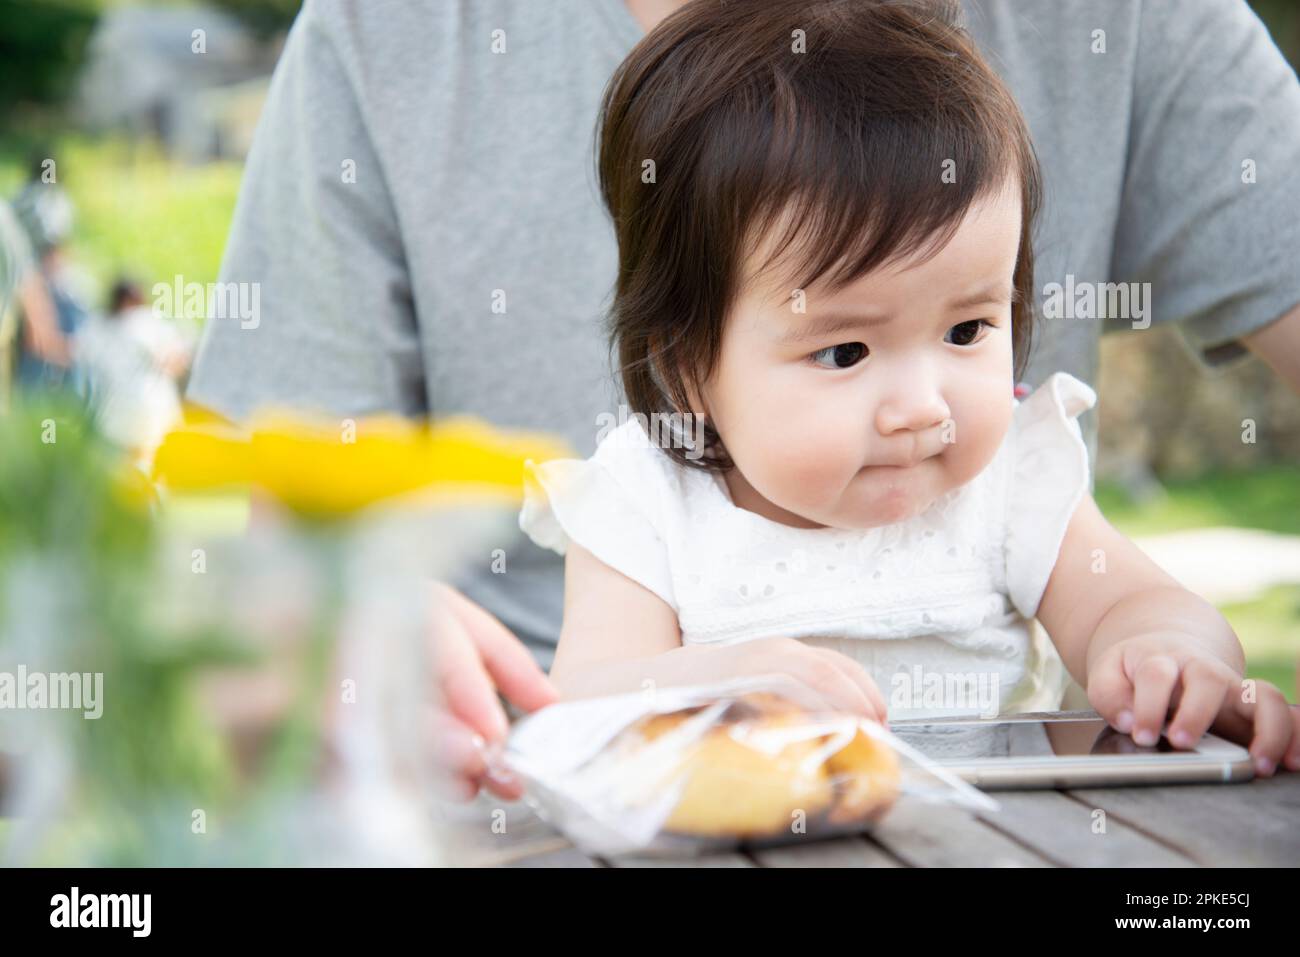 Baby touching a cell phone Stock Photo